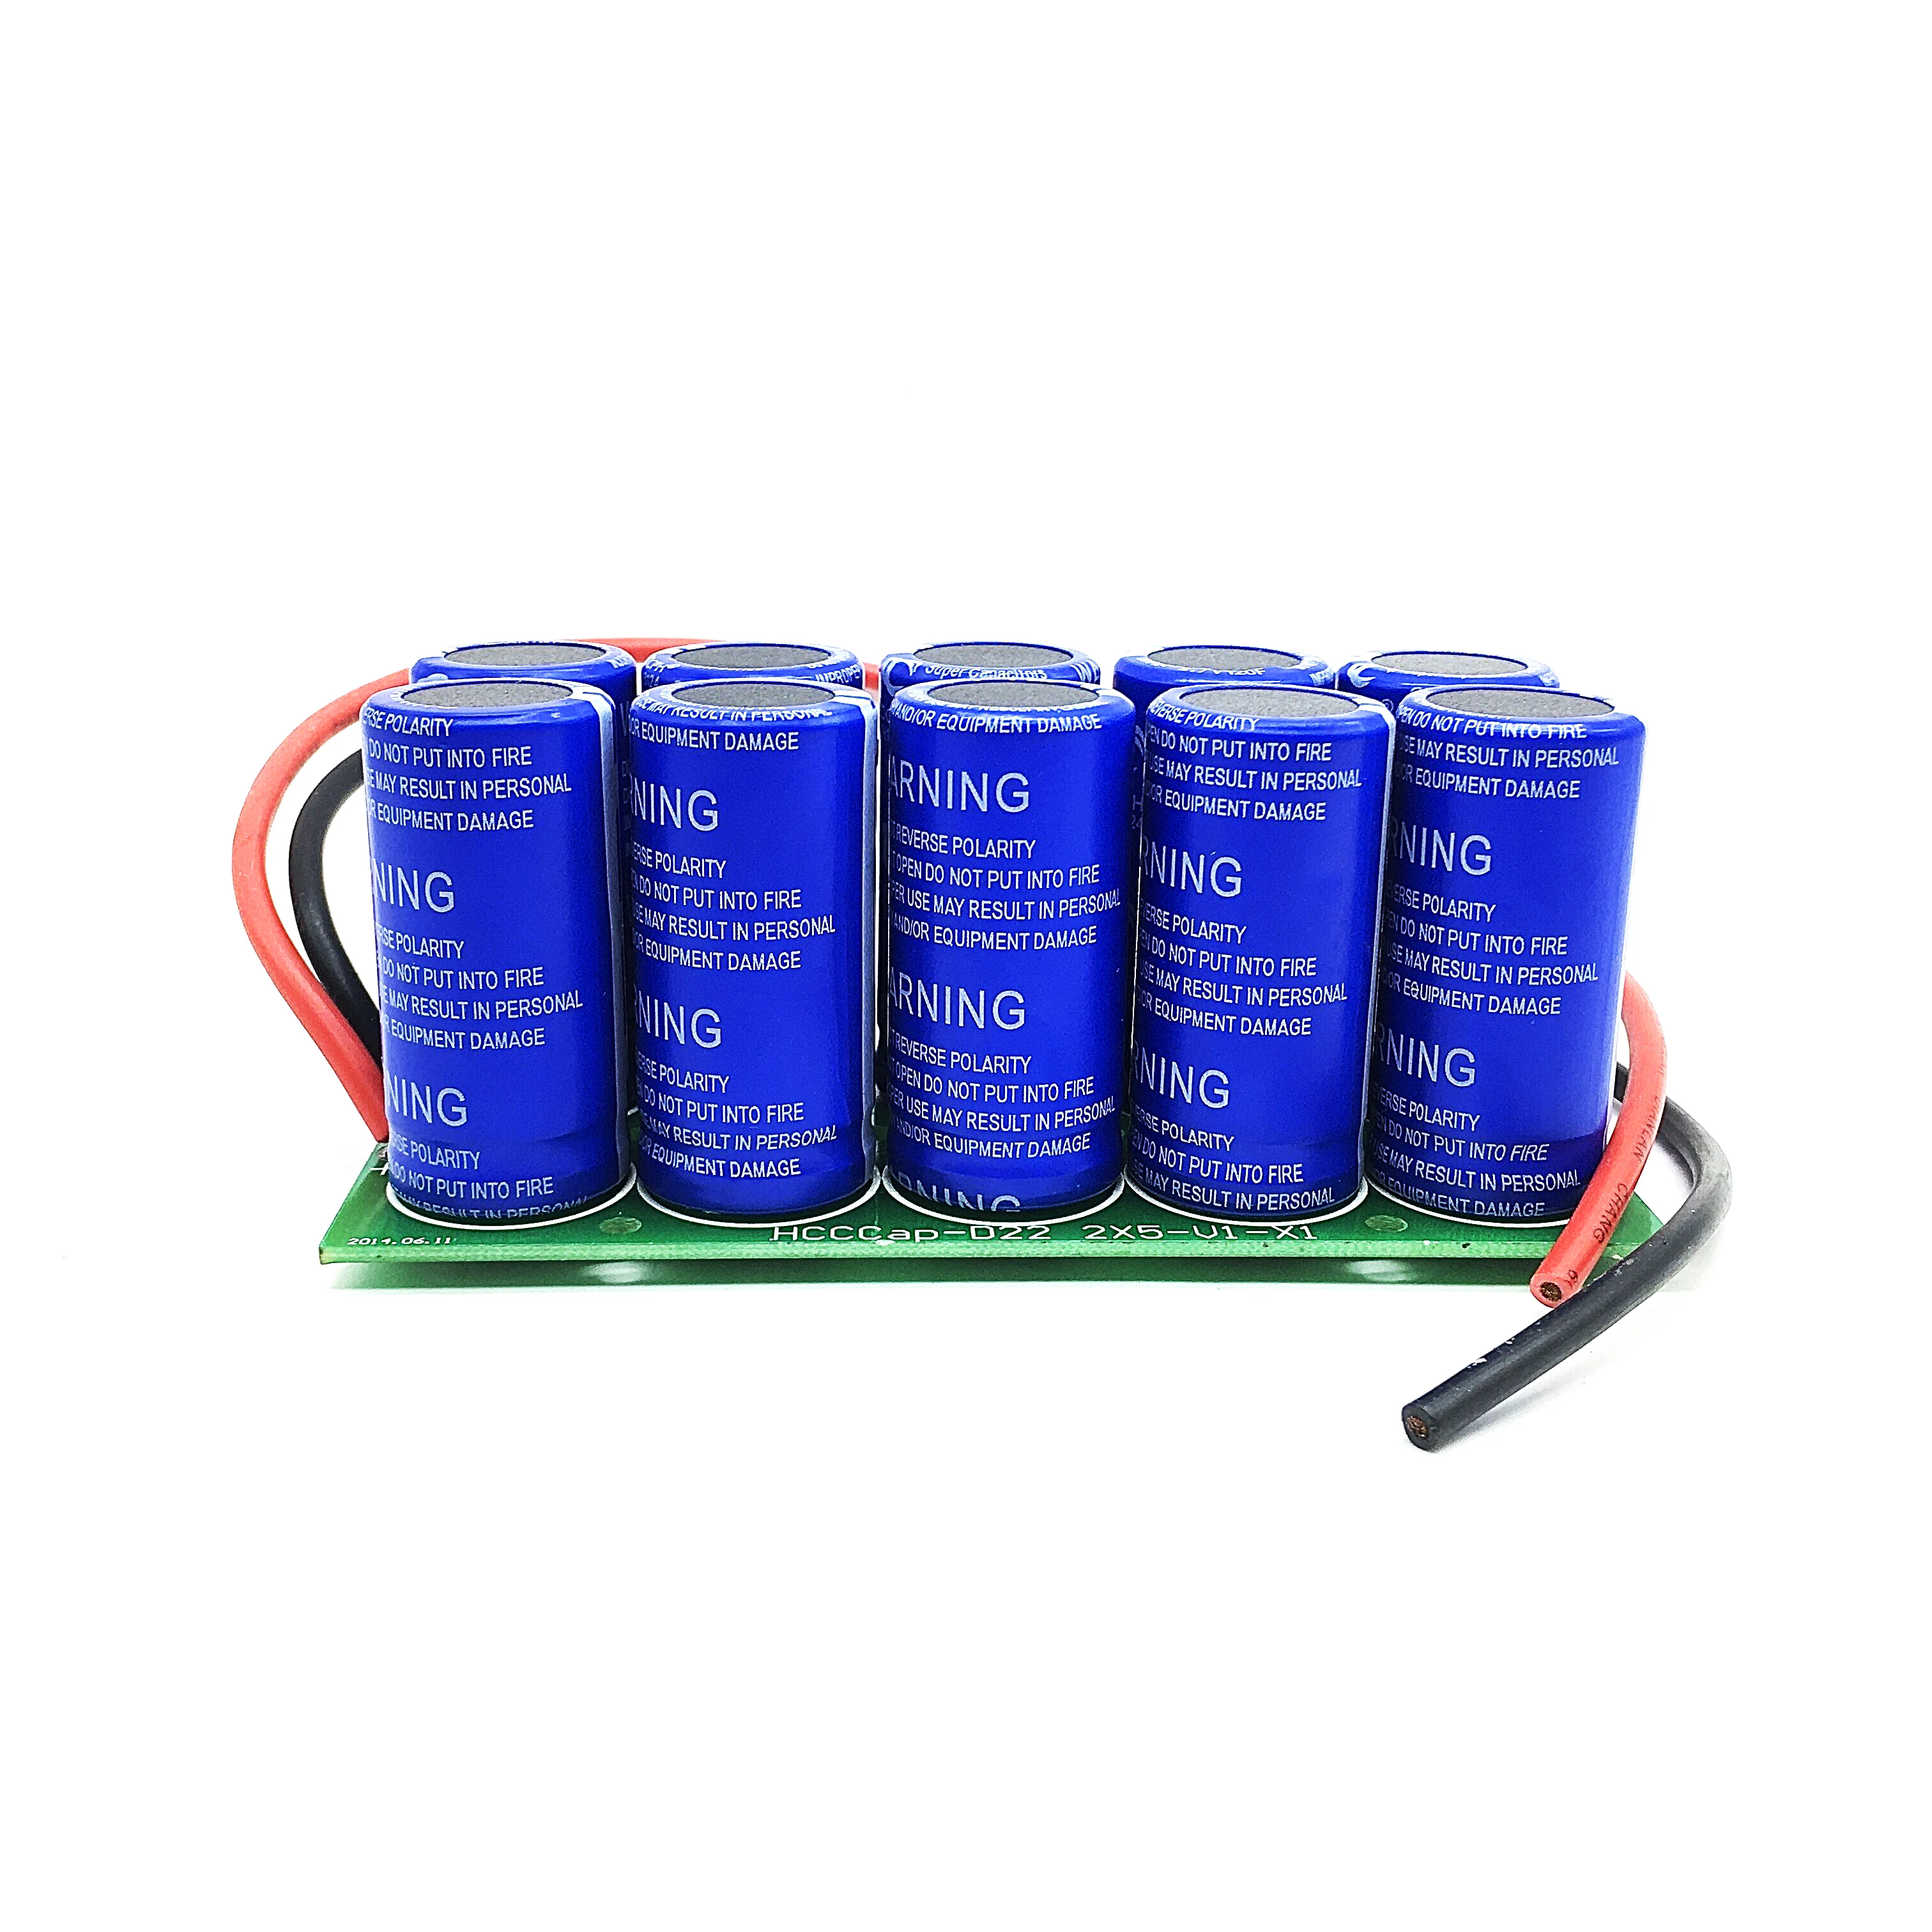 Super Capacitors Farad Capacitor Modules 27V 12F SuperCapacitors With Double Protection Board With Line UltraCapacitor esp32 s3 devkitc 1 module development board equipped with esp32 s3 wroom 1 series modules specifications can be selected